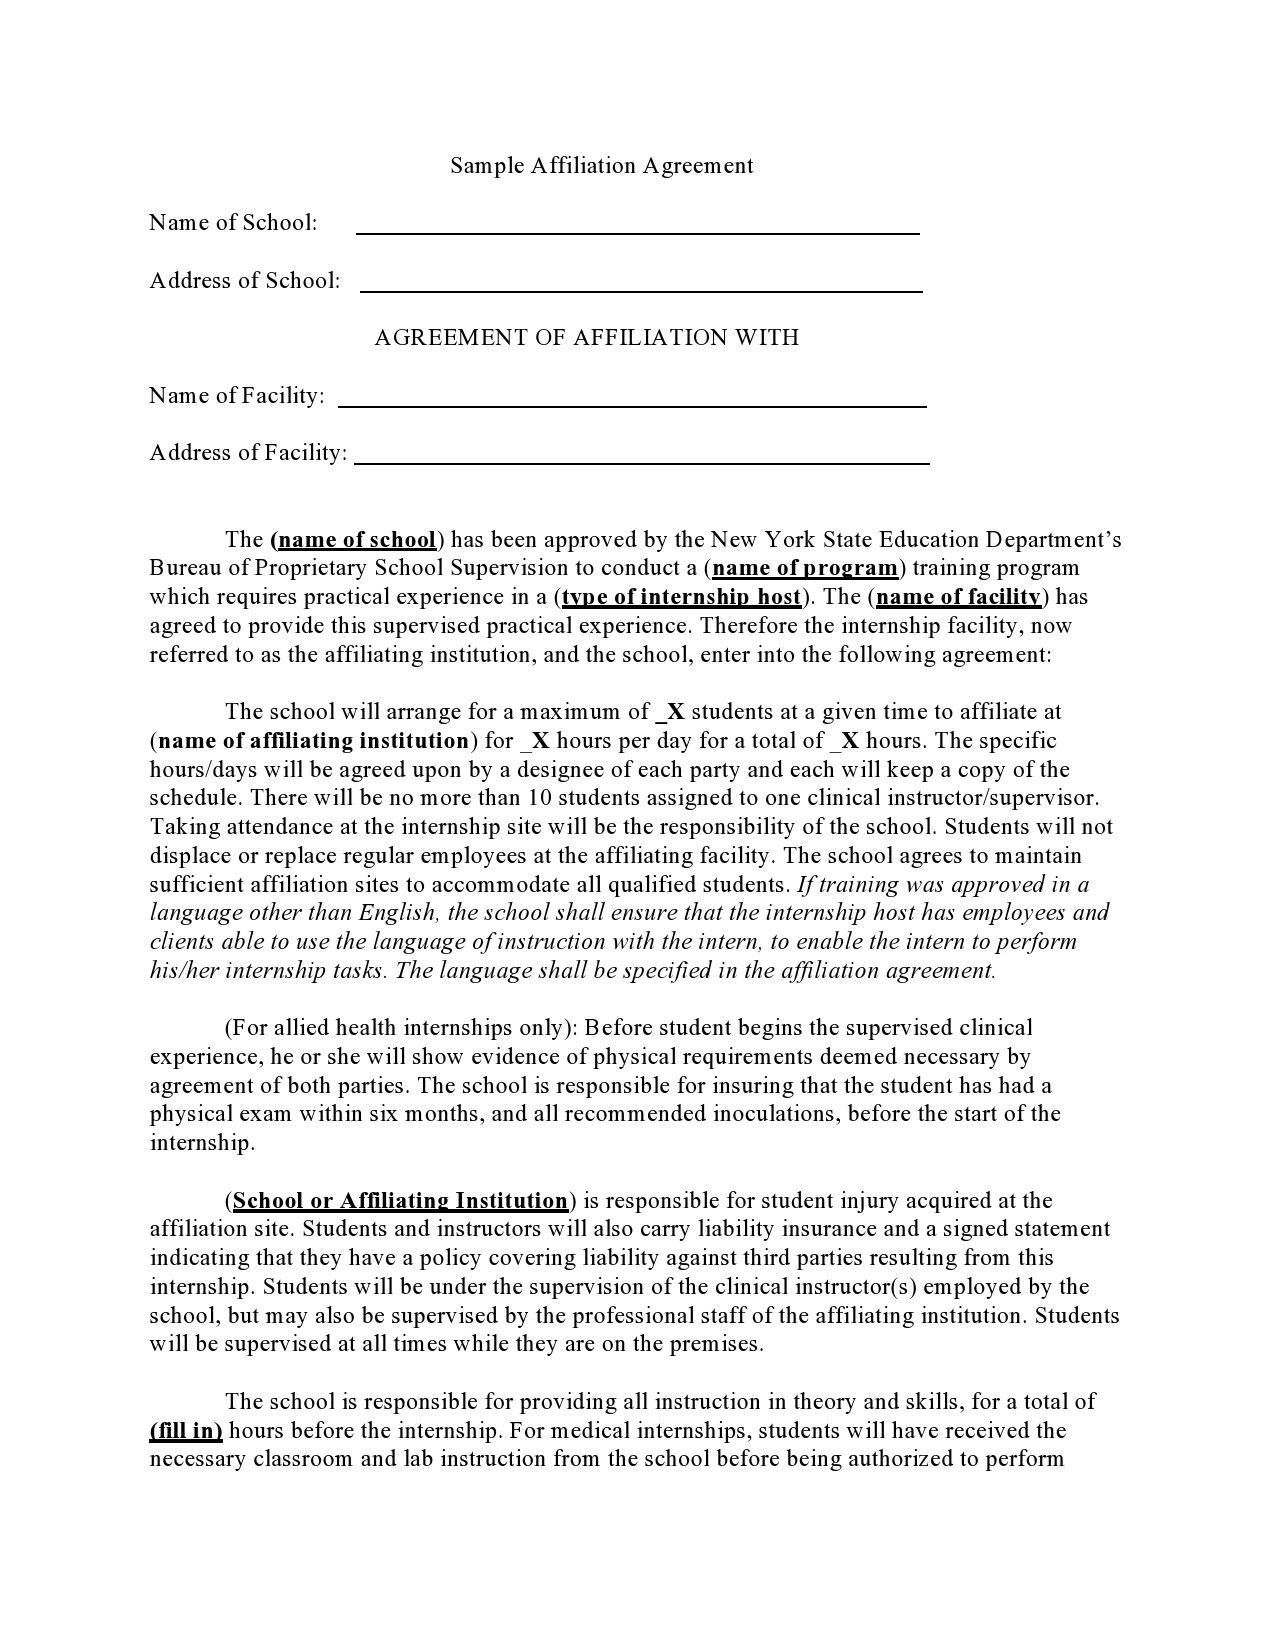 Free affiliate agreement 16